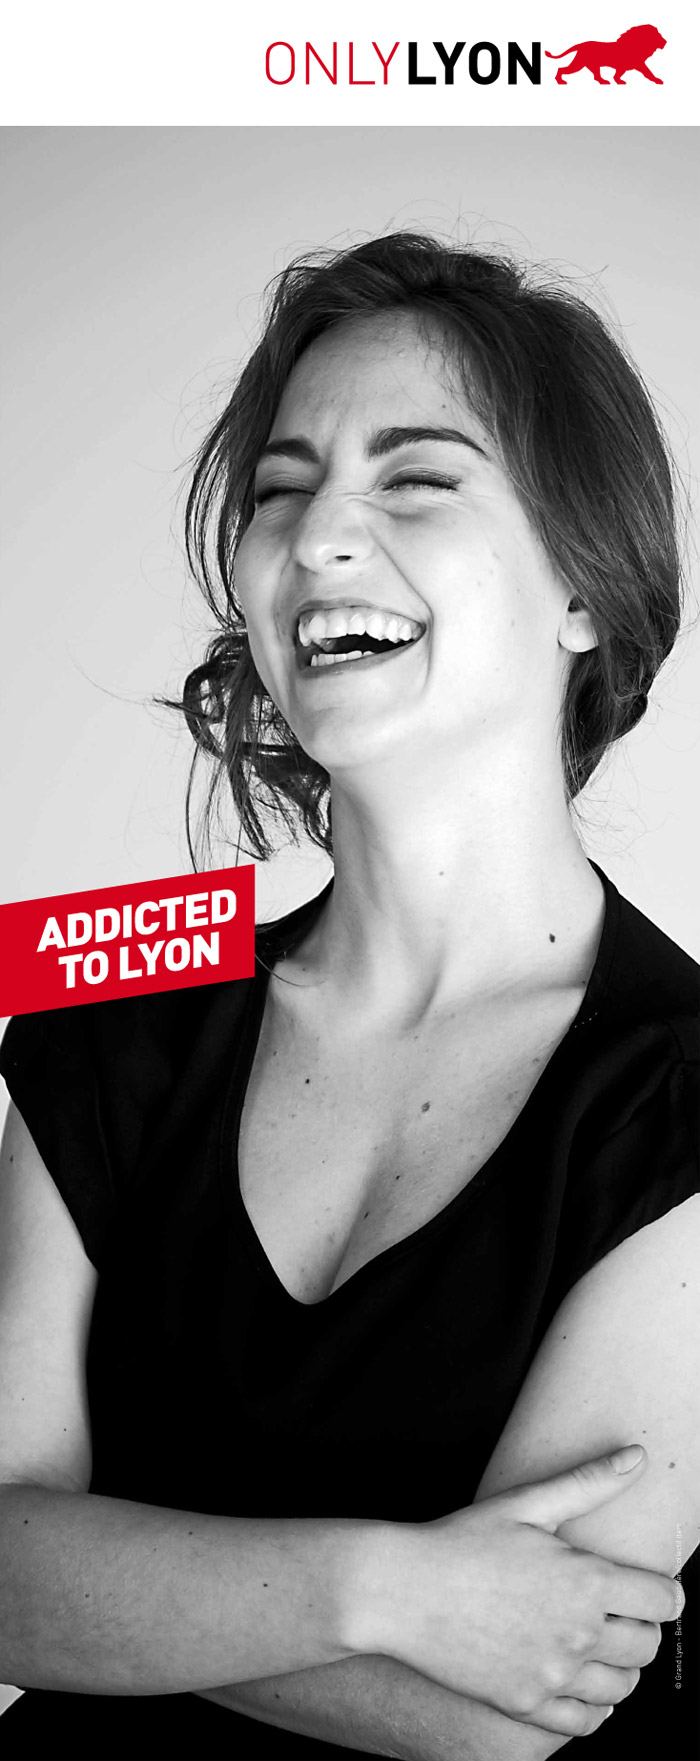 Campagne "Addicted to Lyon"